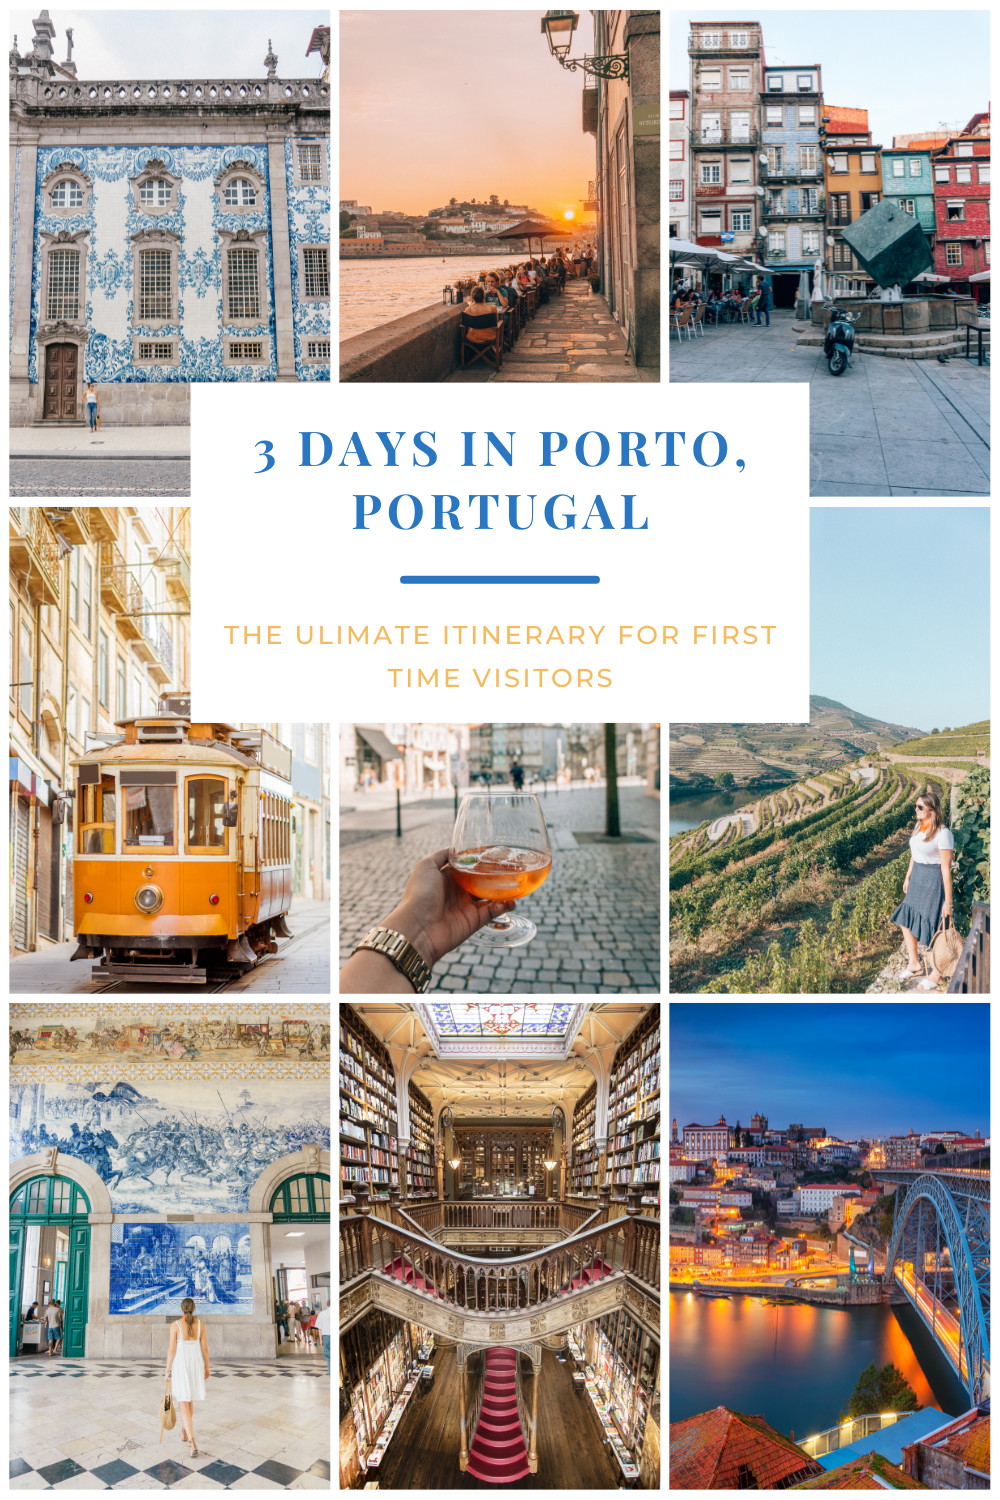 3 Days in Porto, Portugal: The Ultimate Porto Itinerary for First-time Visitors Pint with 9 photos of Porto